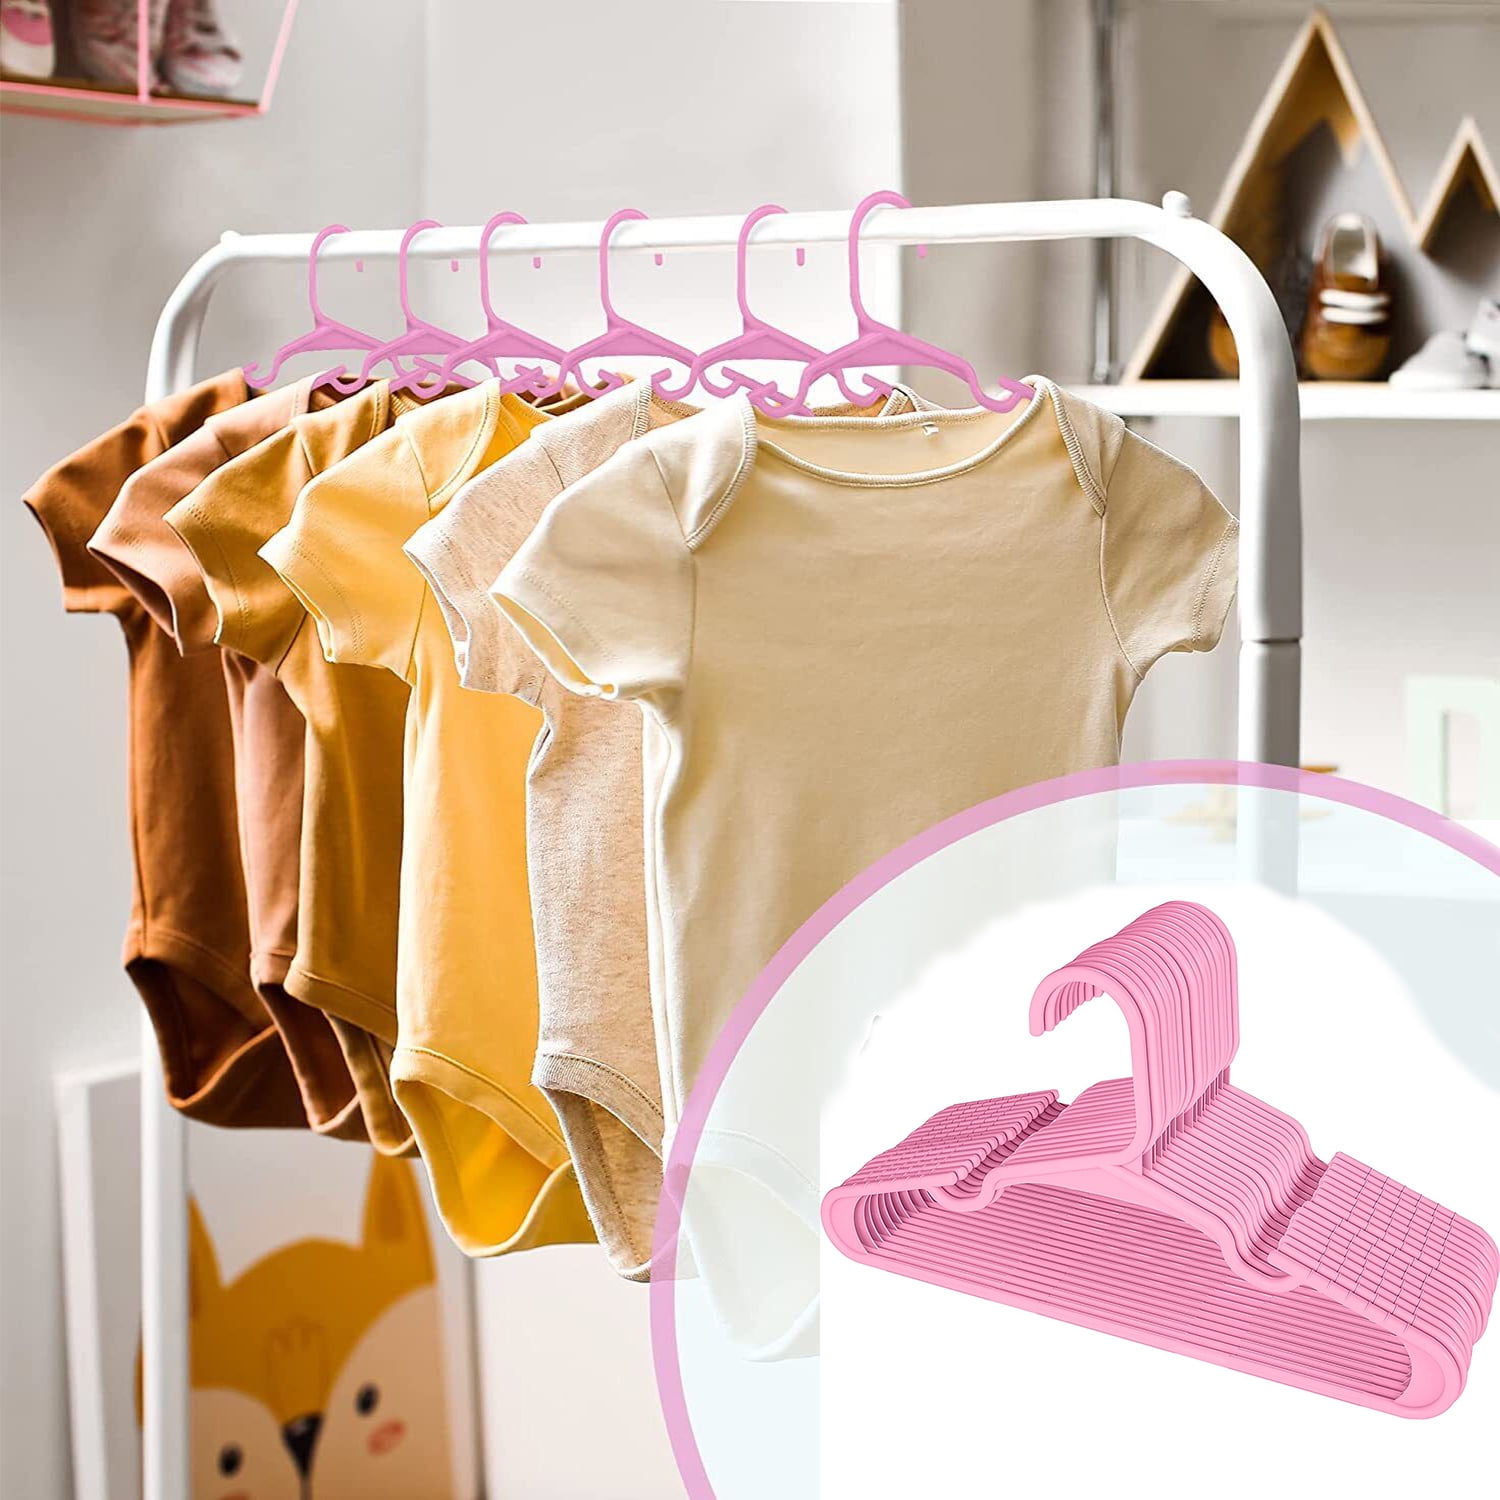 20-100 Pack Home Kids Hangers - 11. 4 Inch Plastic Baby Hangers for Closet